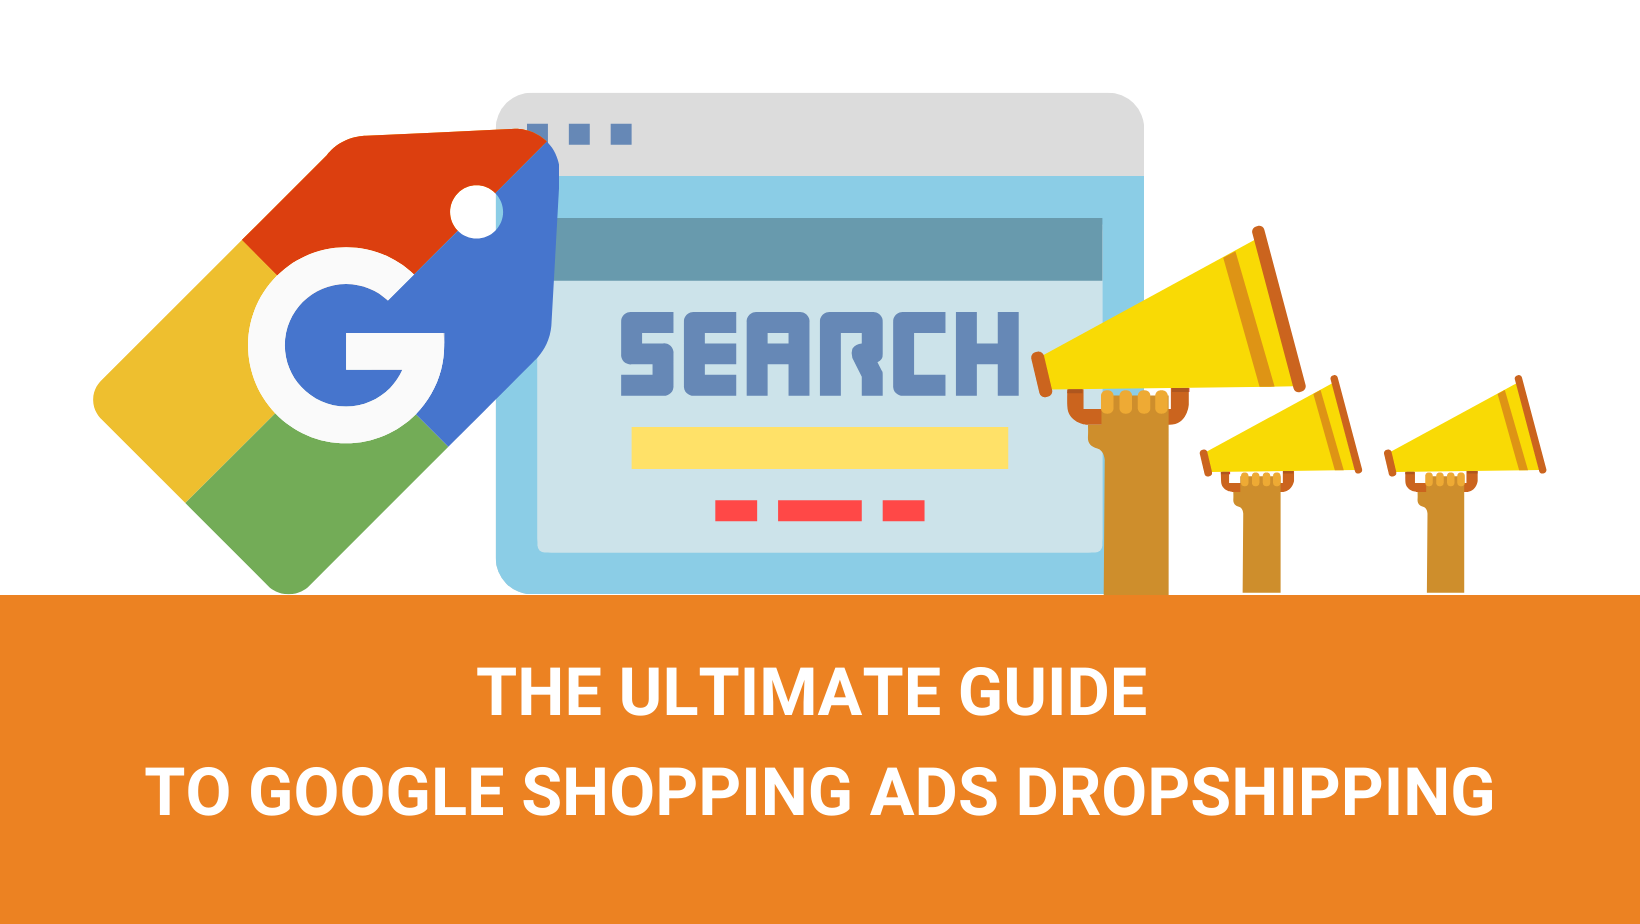 THE ULTIMATE GUIDE TO GOOGLE SHOPPING ADS DROPSHIPPING